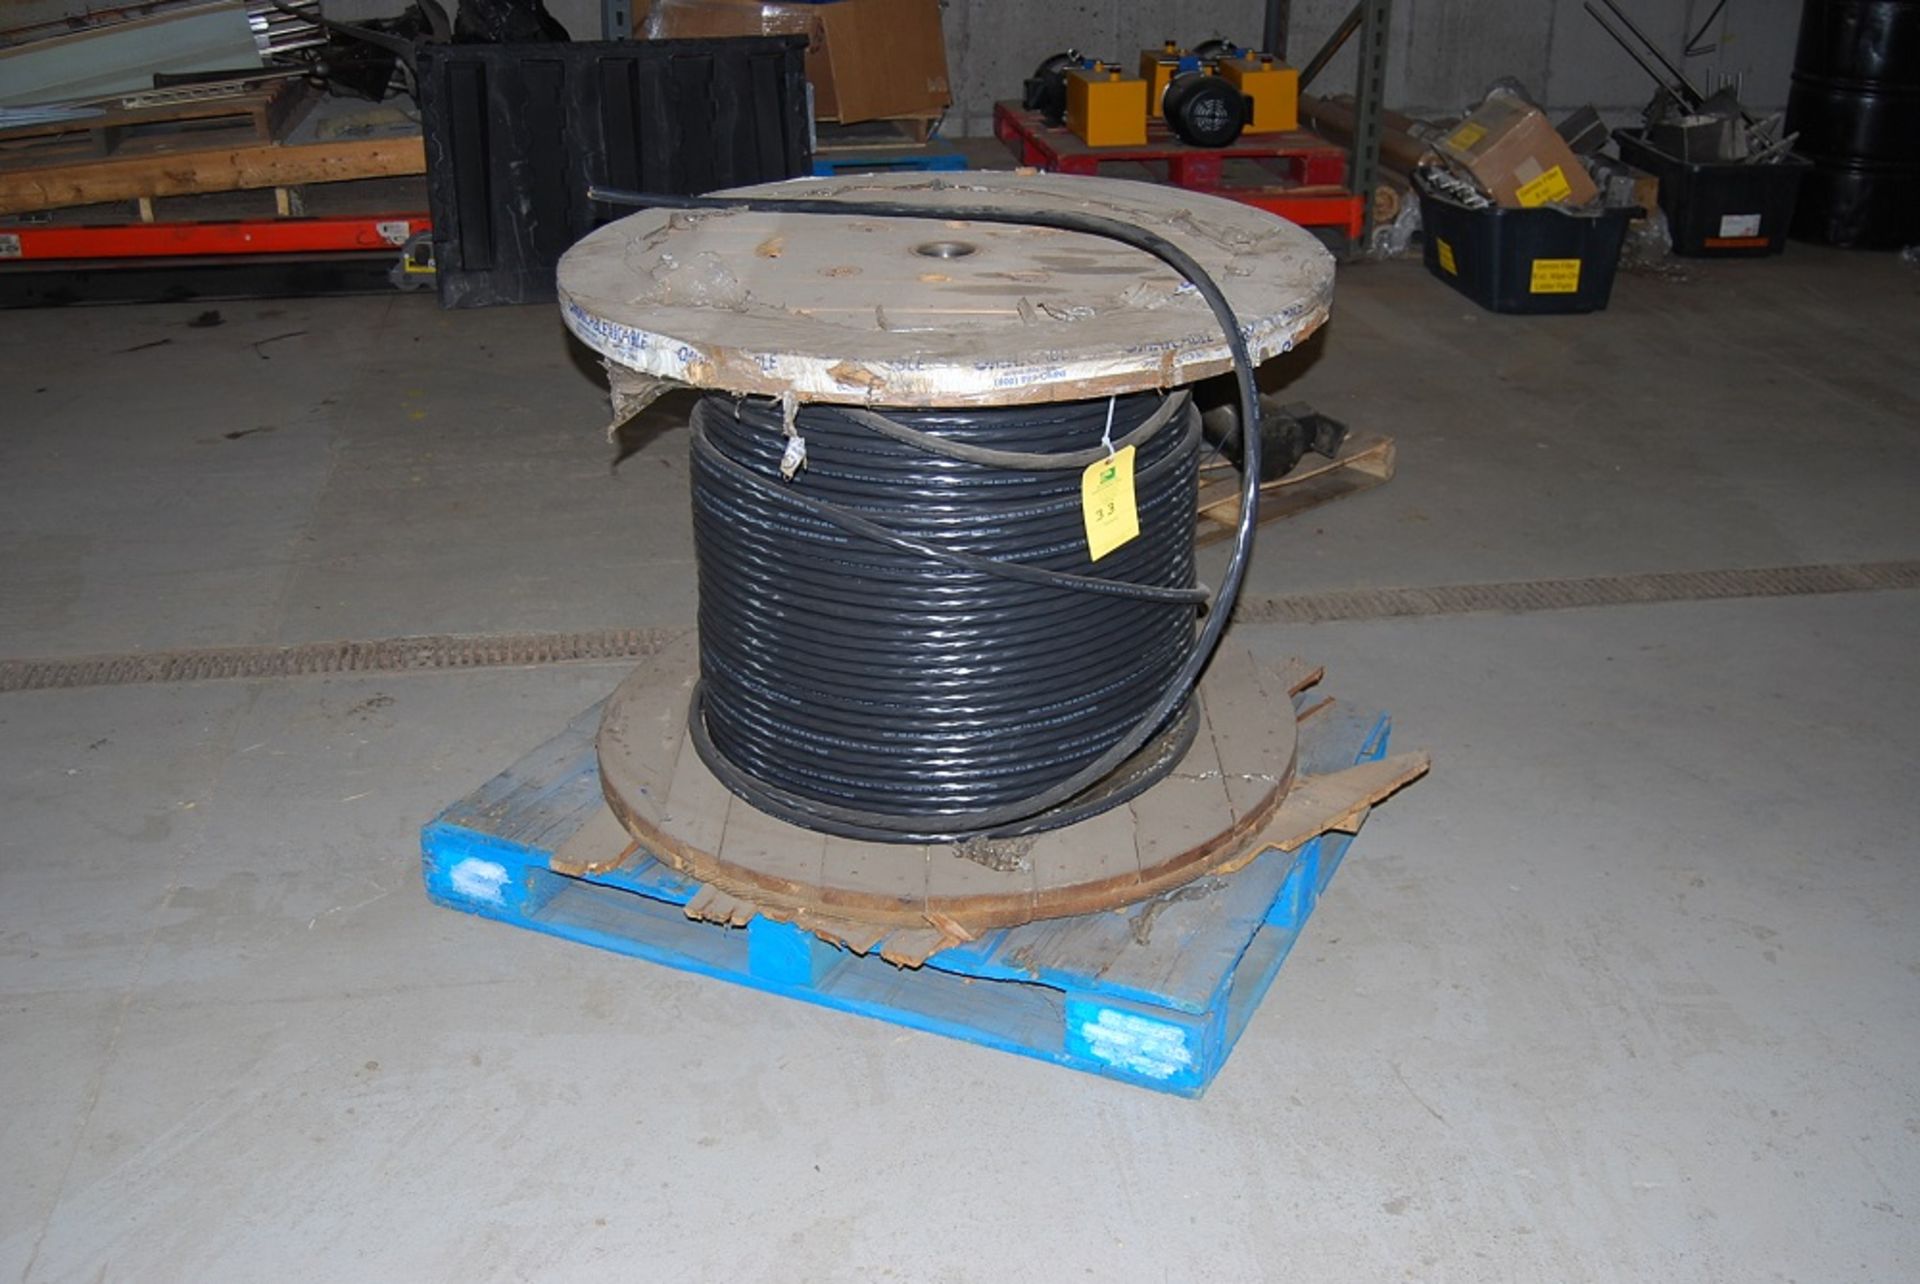 Partial Roll Of Multi Strand Wire, Spool 40" dia x 30" tall, Pallet: 40" x 48" x 38" tall - Image 2 of 4